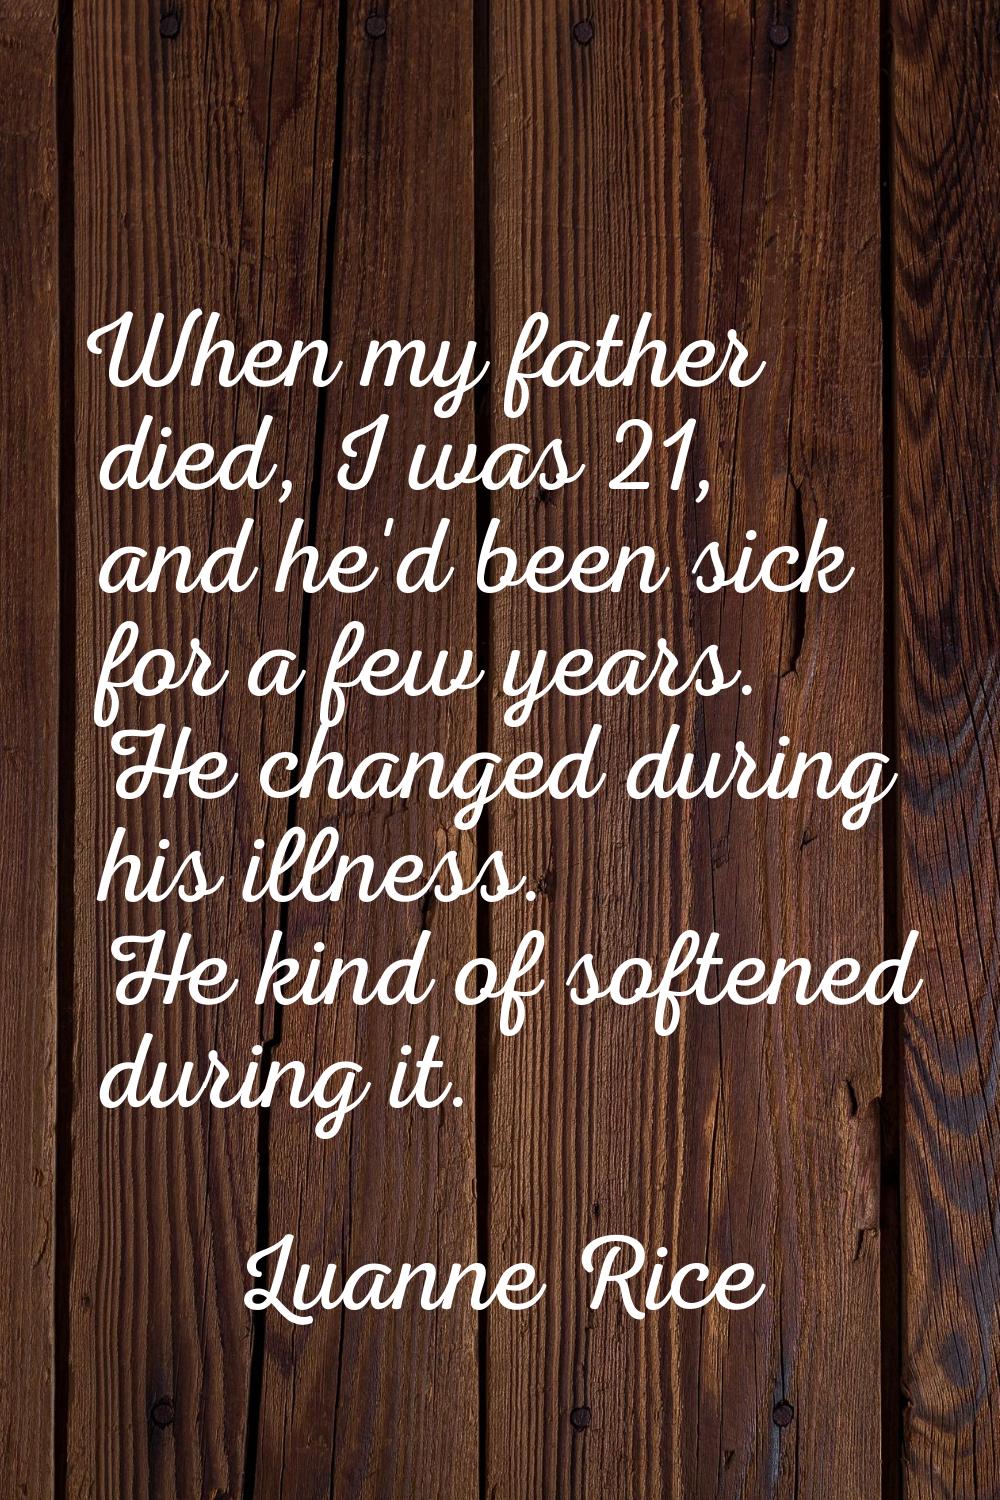 When my father died, I was 21, and he'd been sick for a few years. He changed during his illness. H